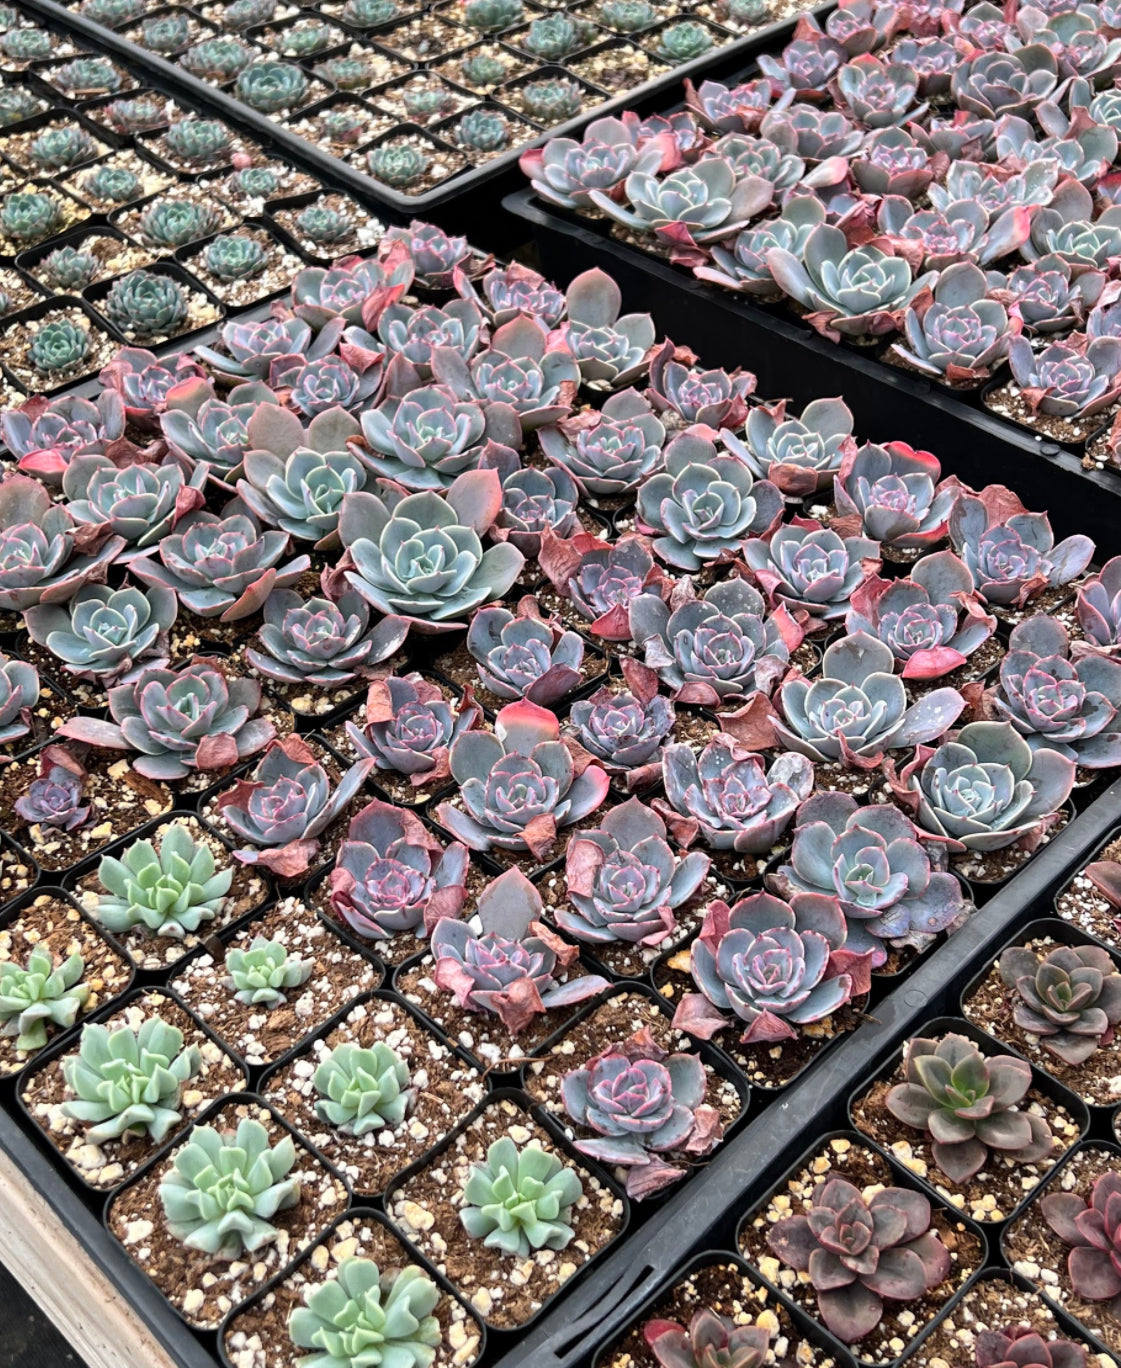 20-Pack of COLORFUL 2" Succulents